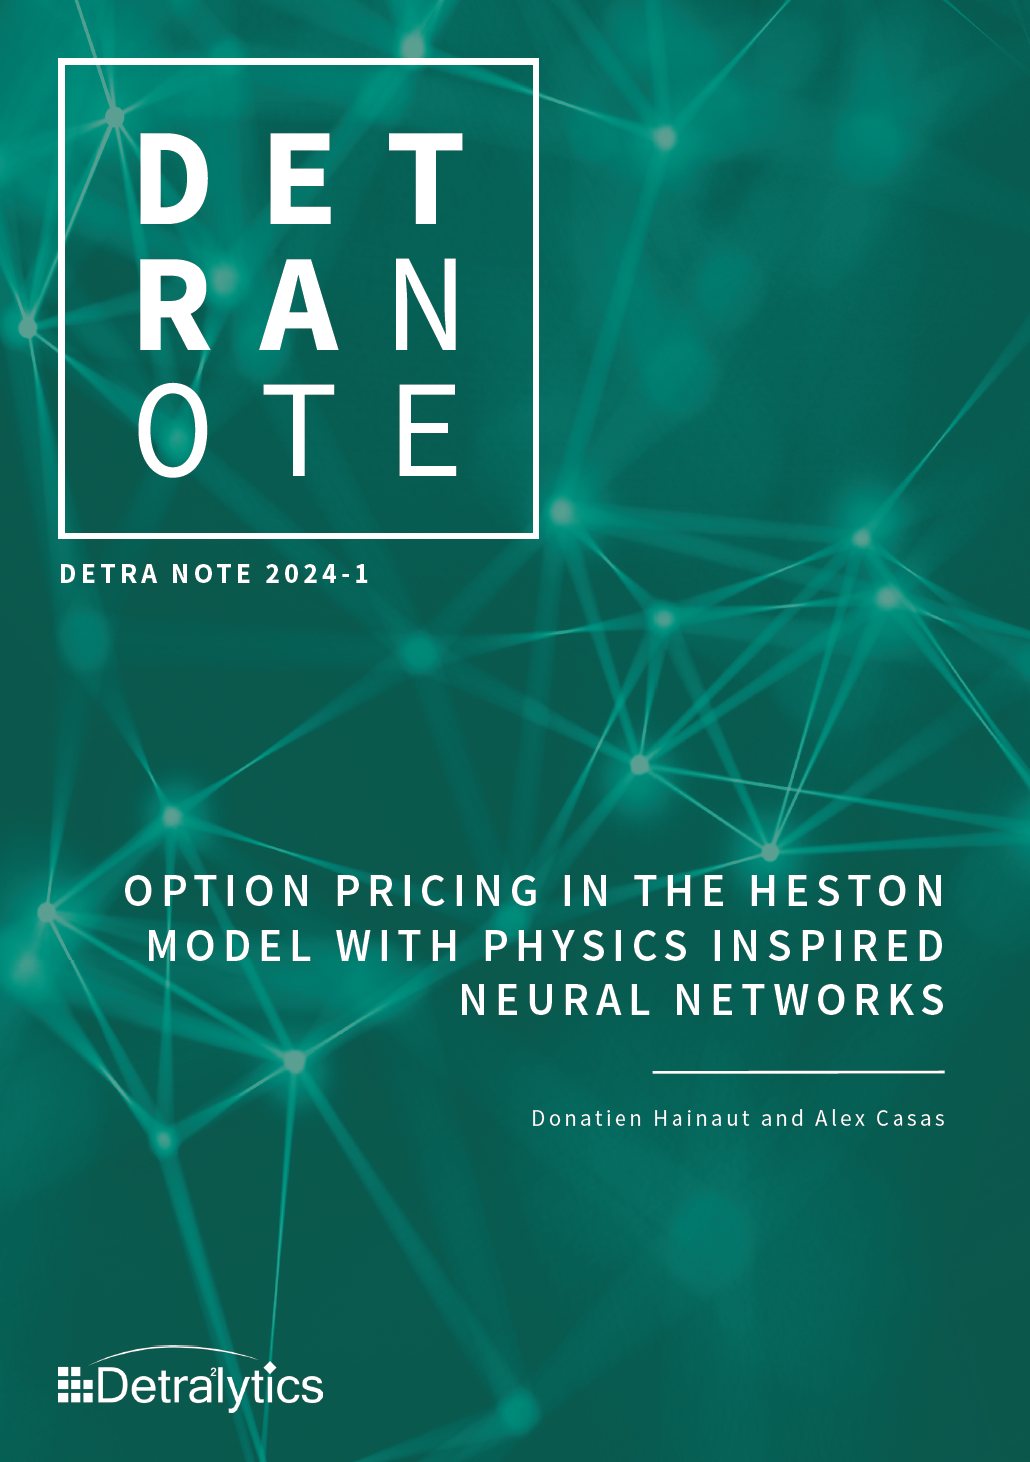 Option pricing in the Heston model with Physics inspired neural networks